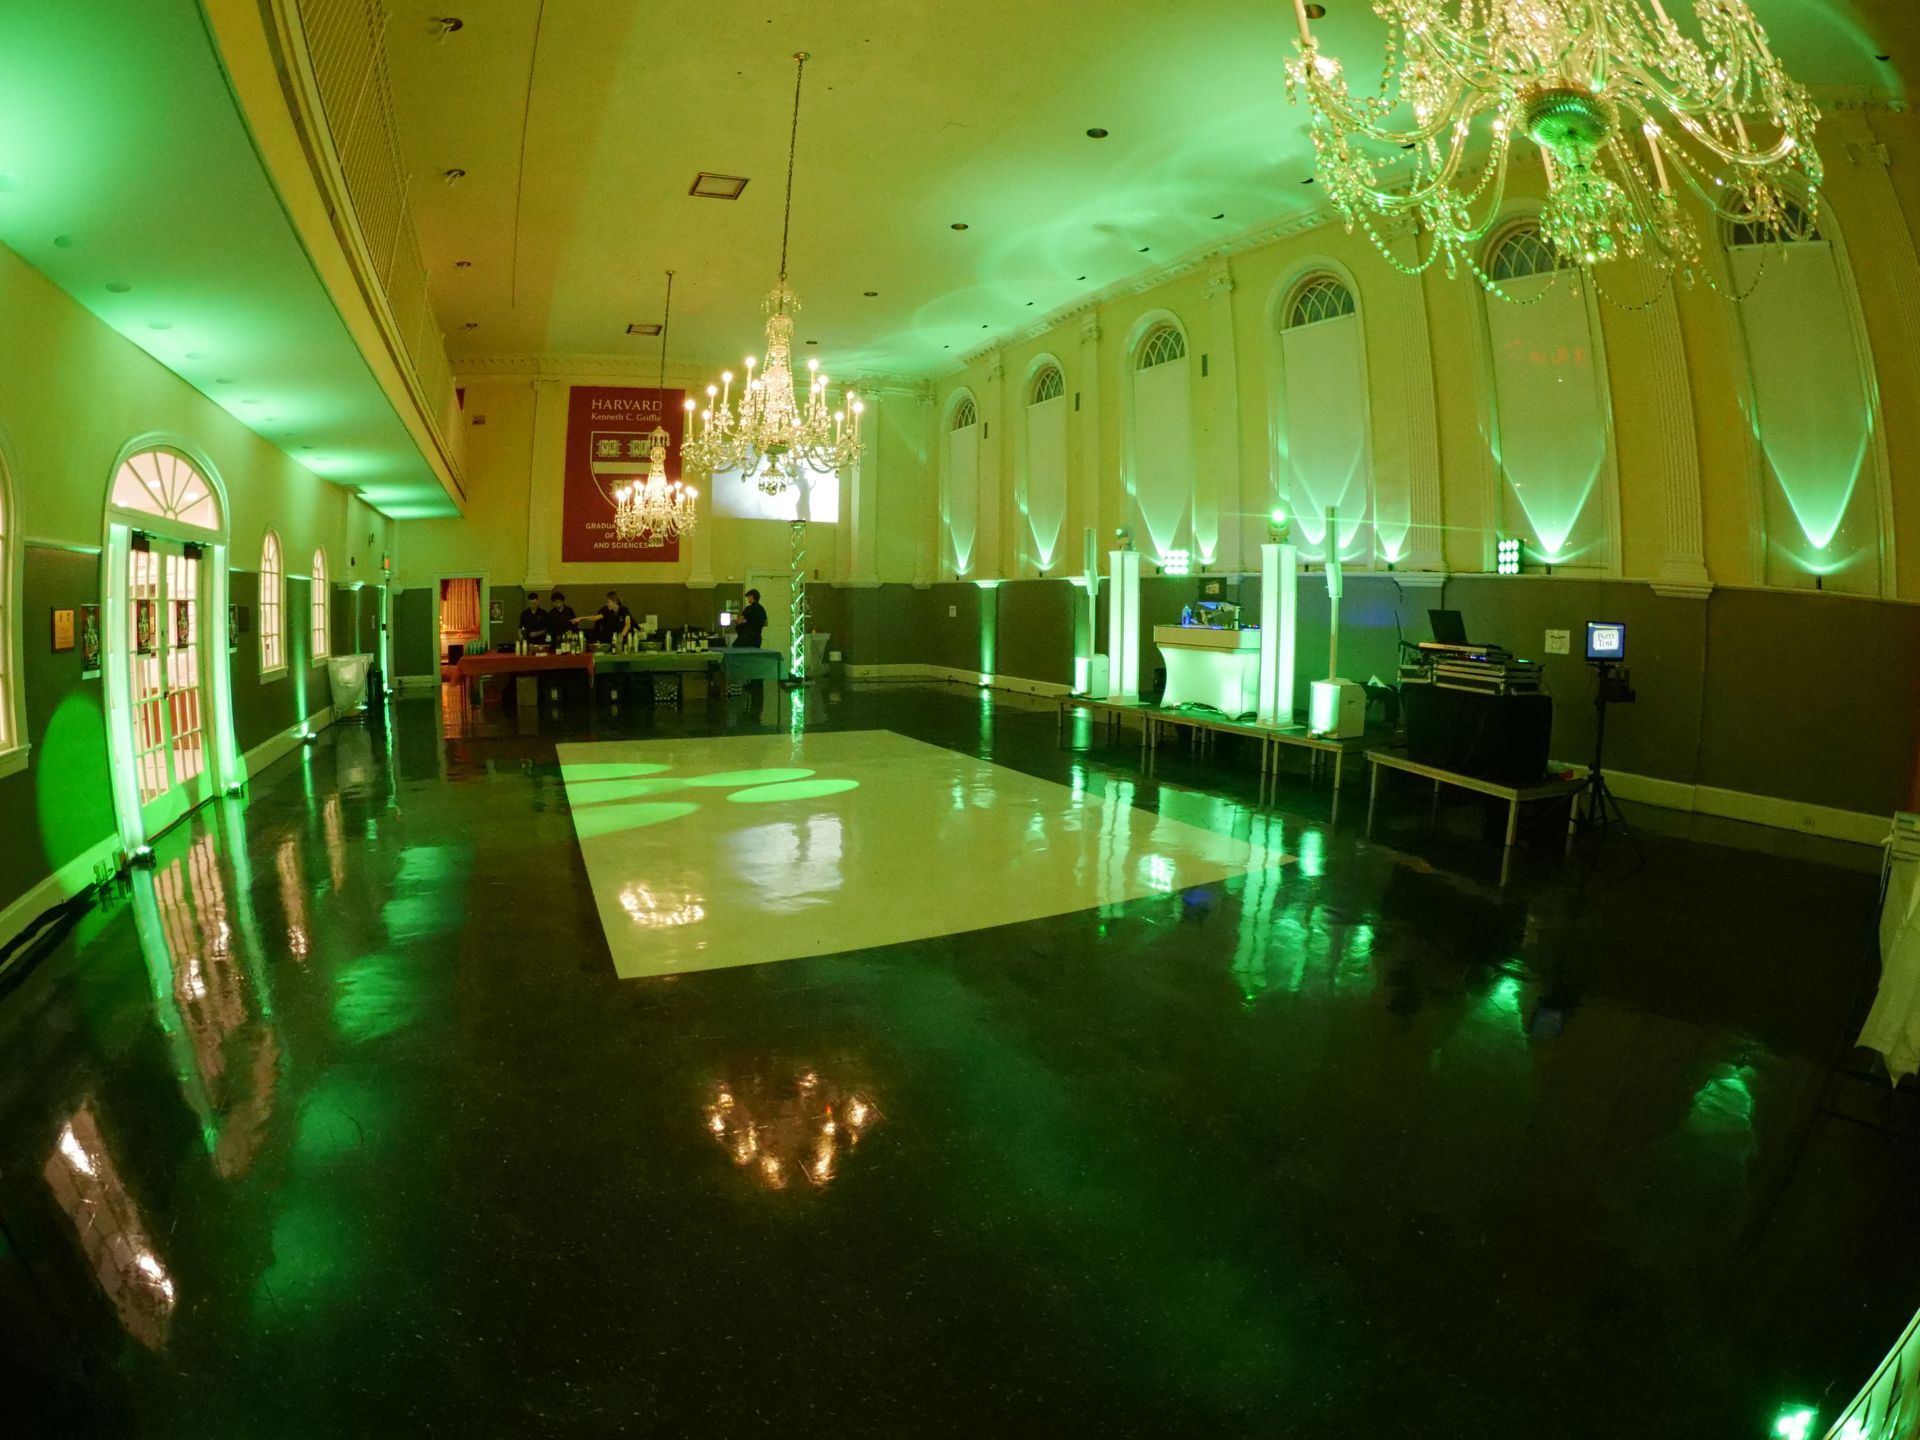 A large room with a dance floor and a chandelier.